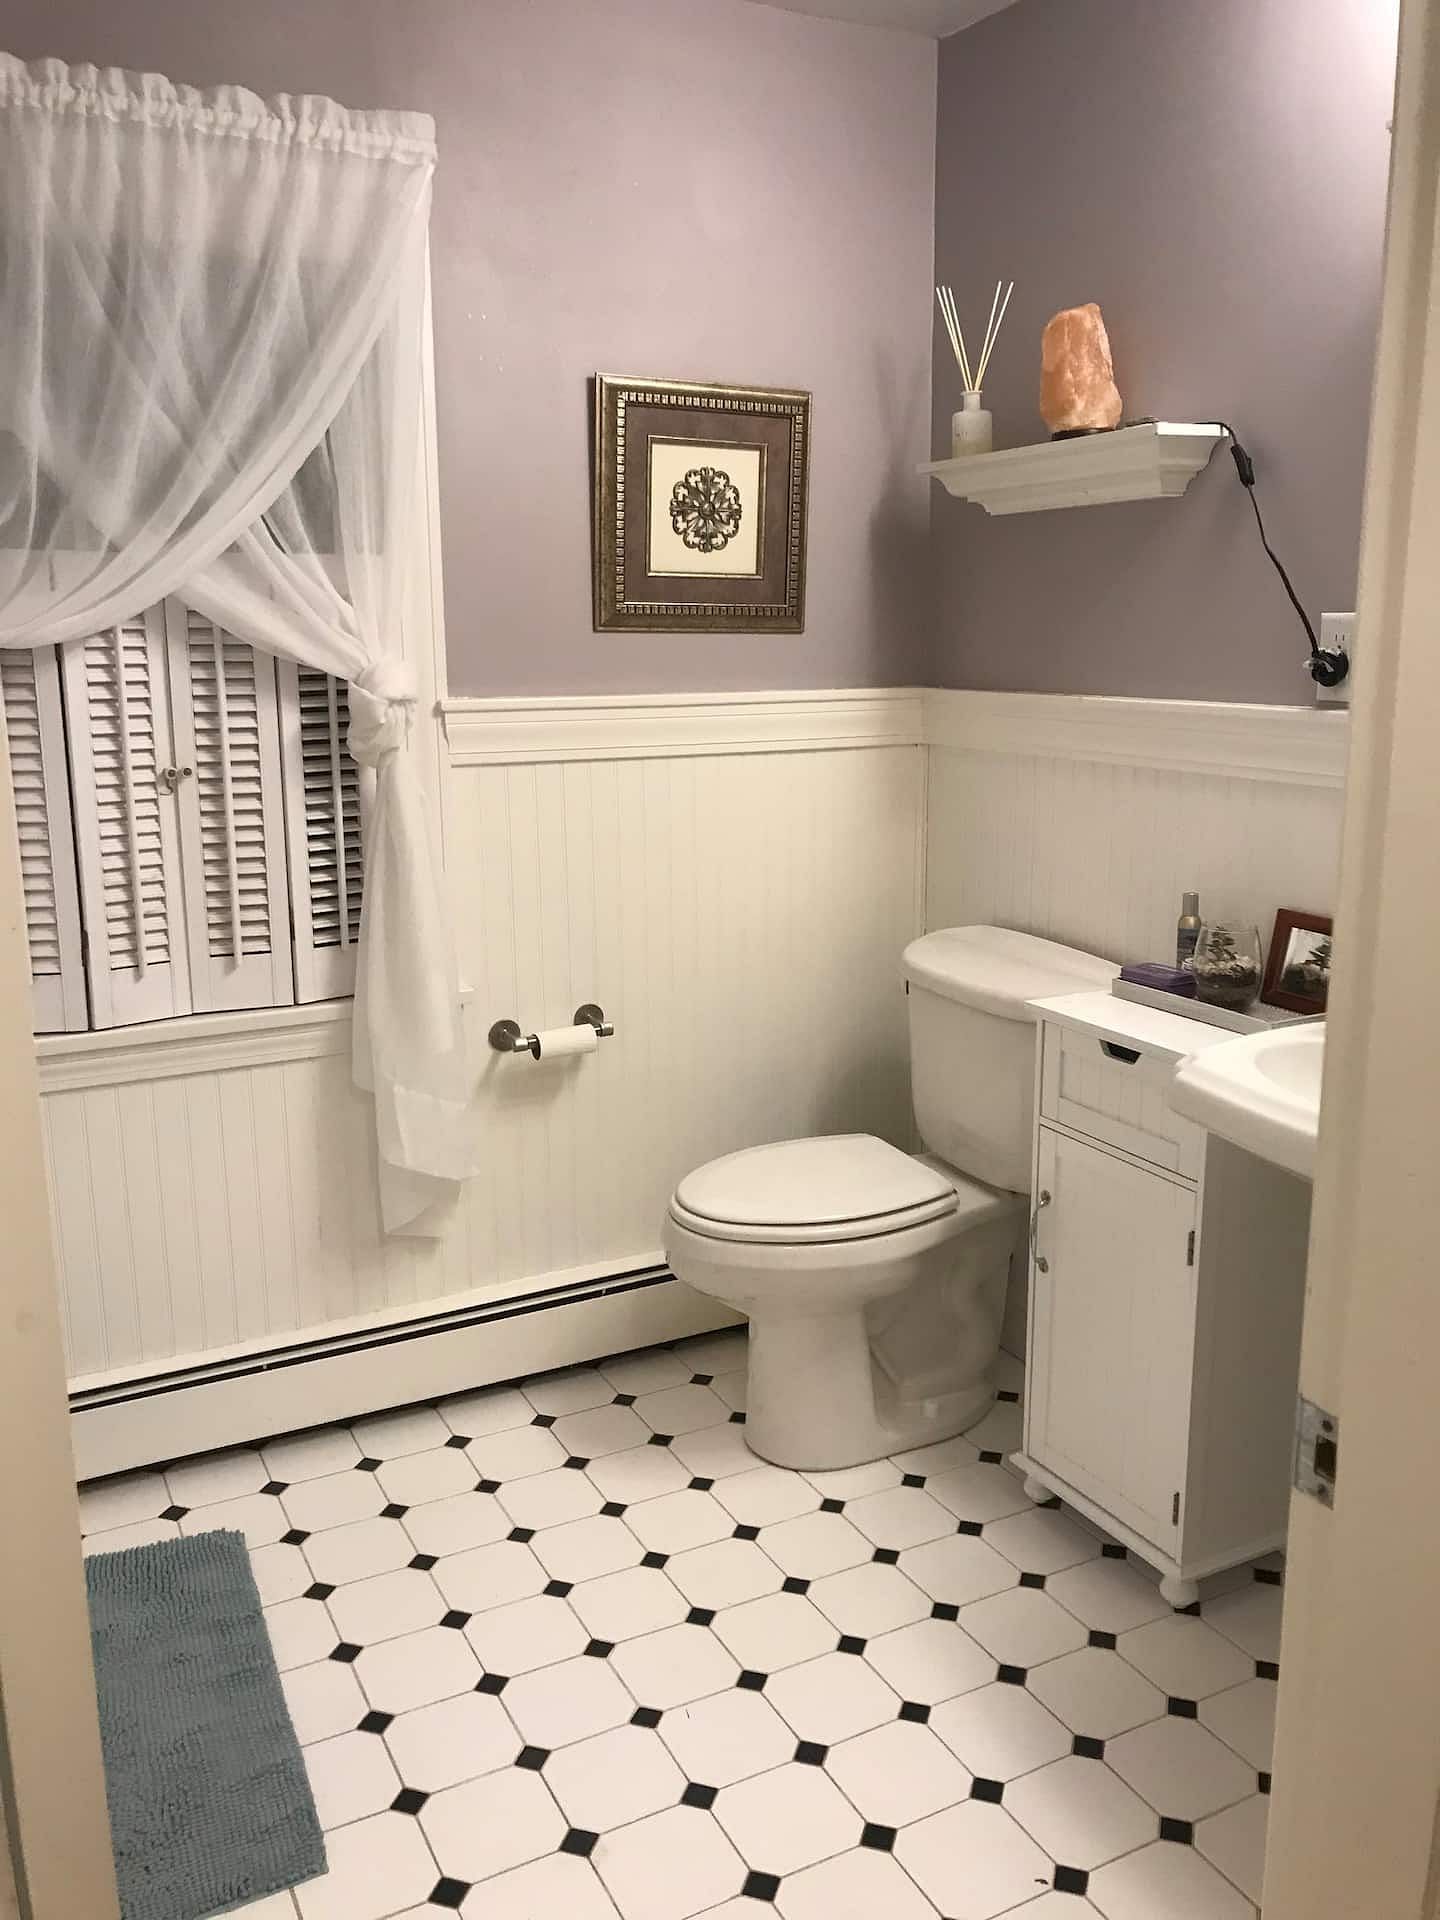 JWguest House at Falmouth, Massachusetts | Private suite near Old Silver Beach on Beautiful Cape Cod!  | Jwbnb no brobnb 4